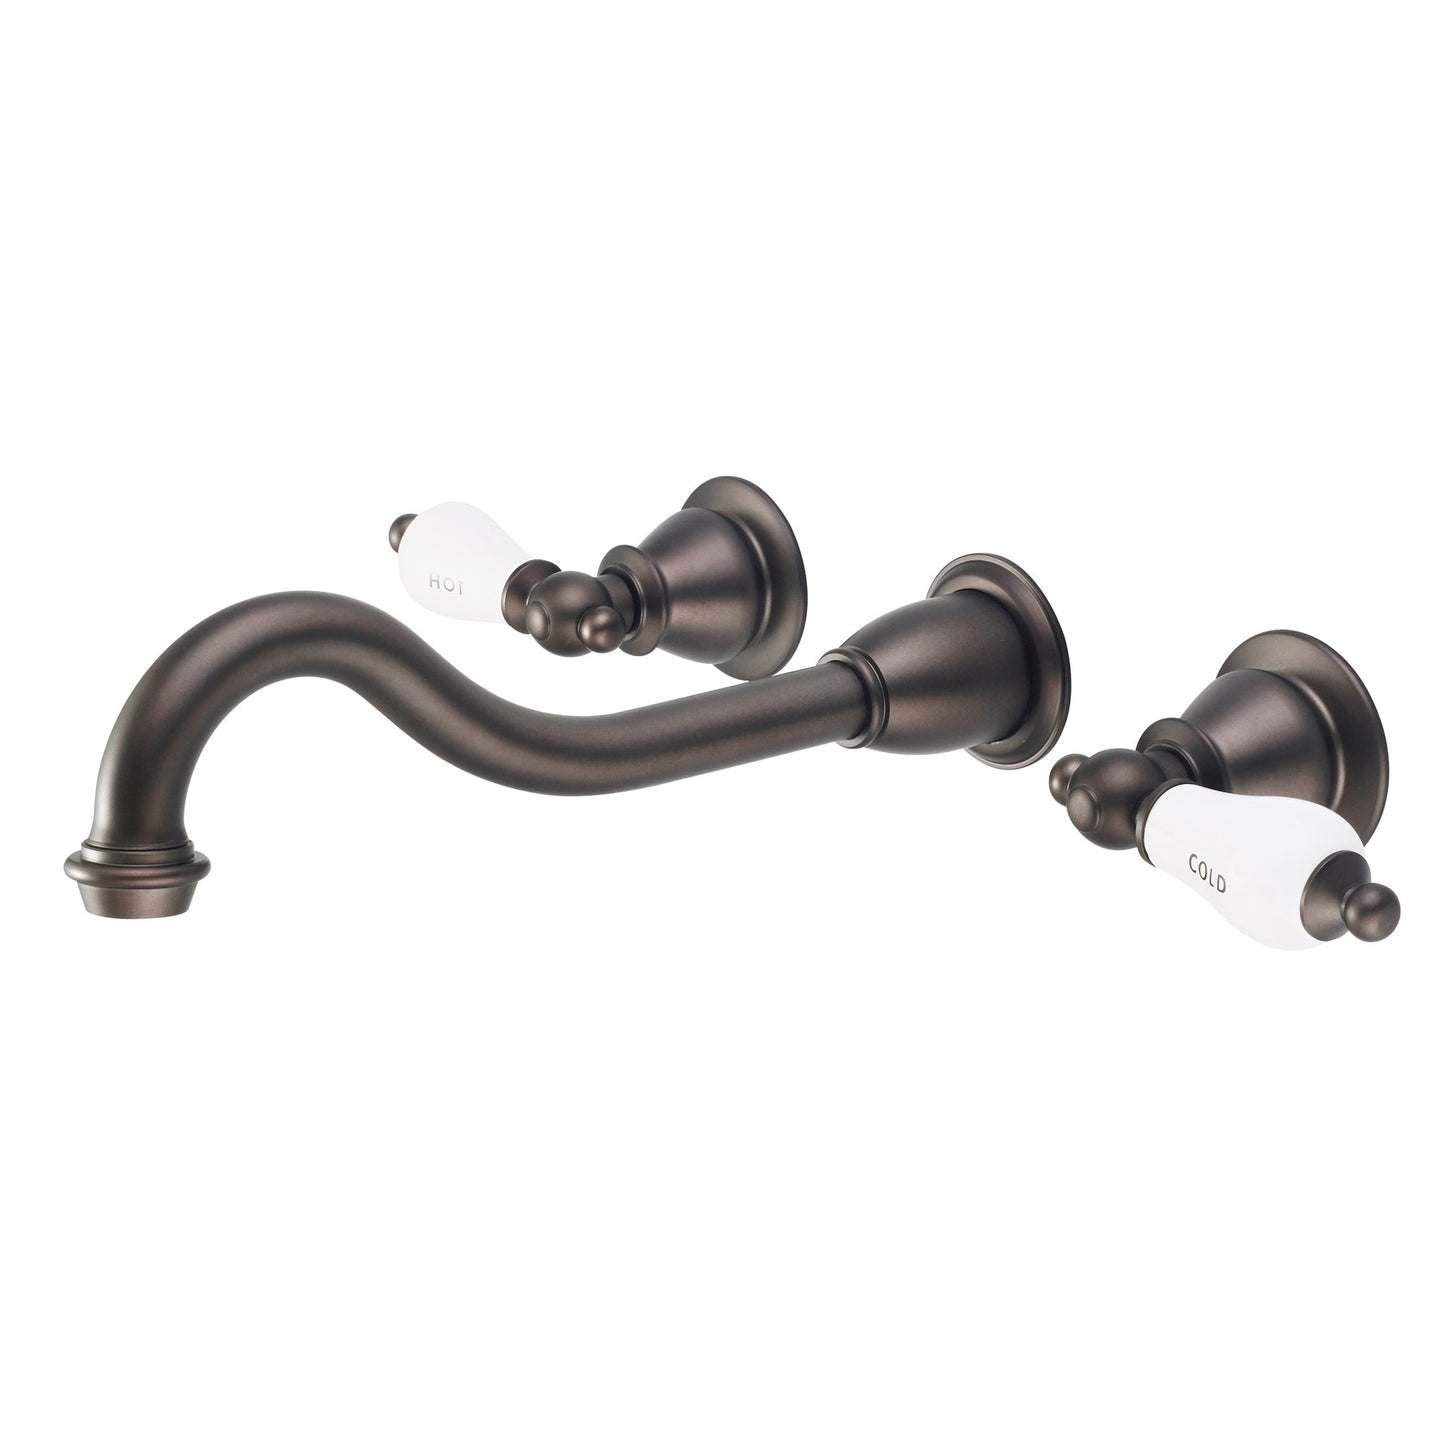 Water Creation Elegant Spout Wall Mount Vessel/Lavatory F4-0001 8" Brown Solid Brass Faucet With Porcelain Lever Handles, Hot And Cold Labels Included